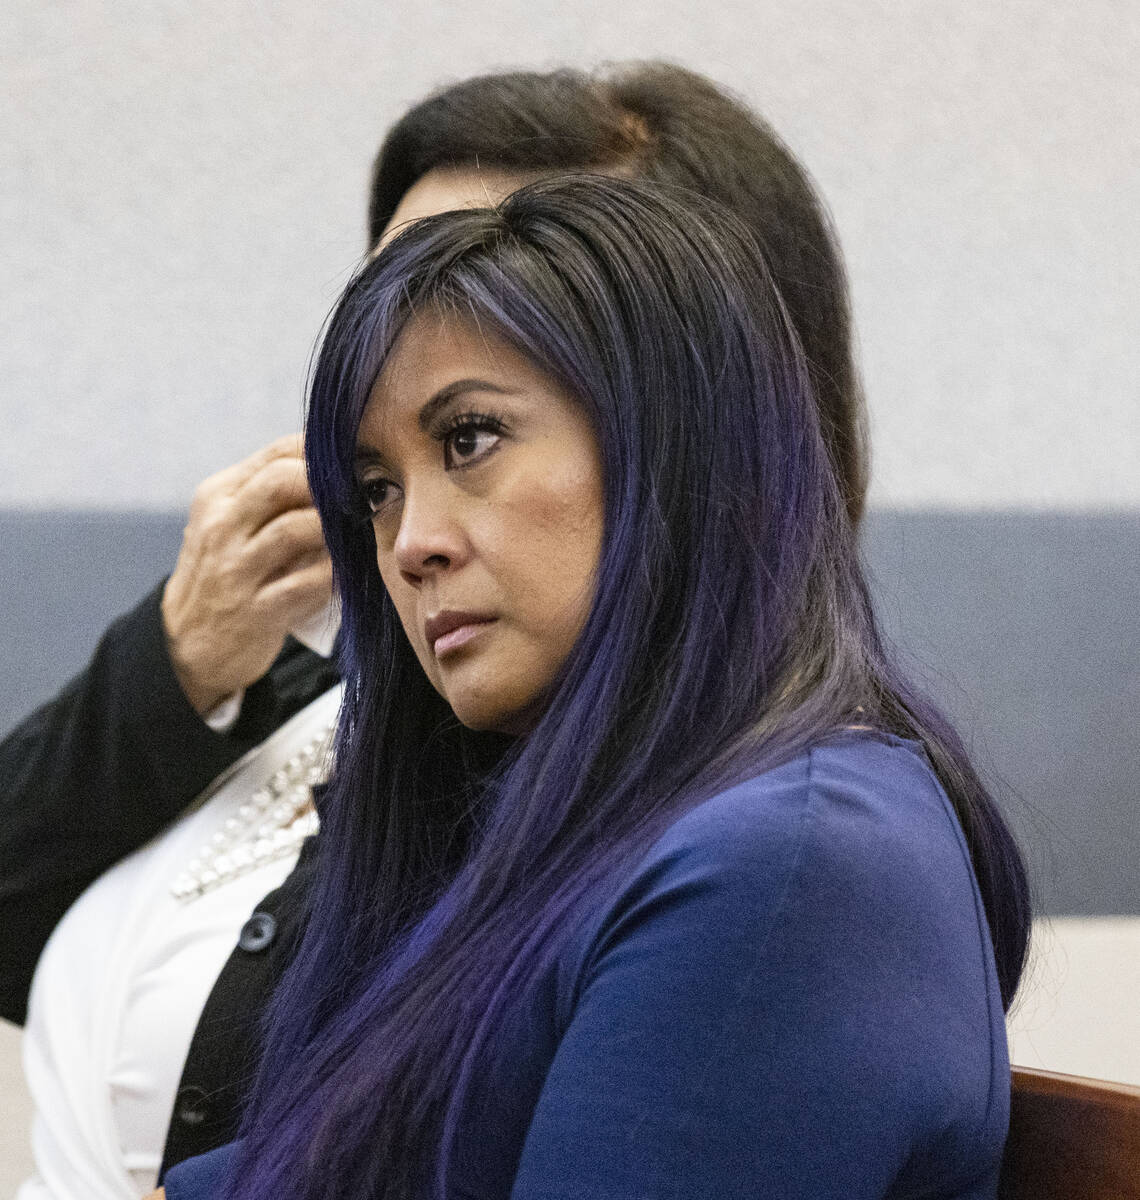 Mae Ismael, right/front, attends a bail hearing for her husband Robert Telles, accused in death ...